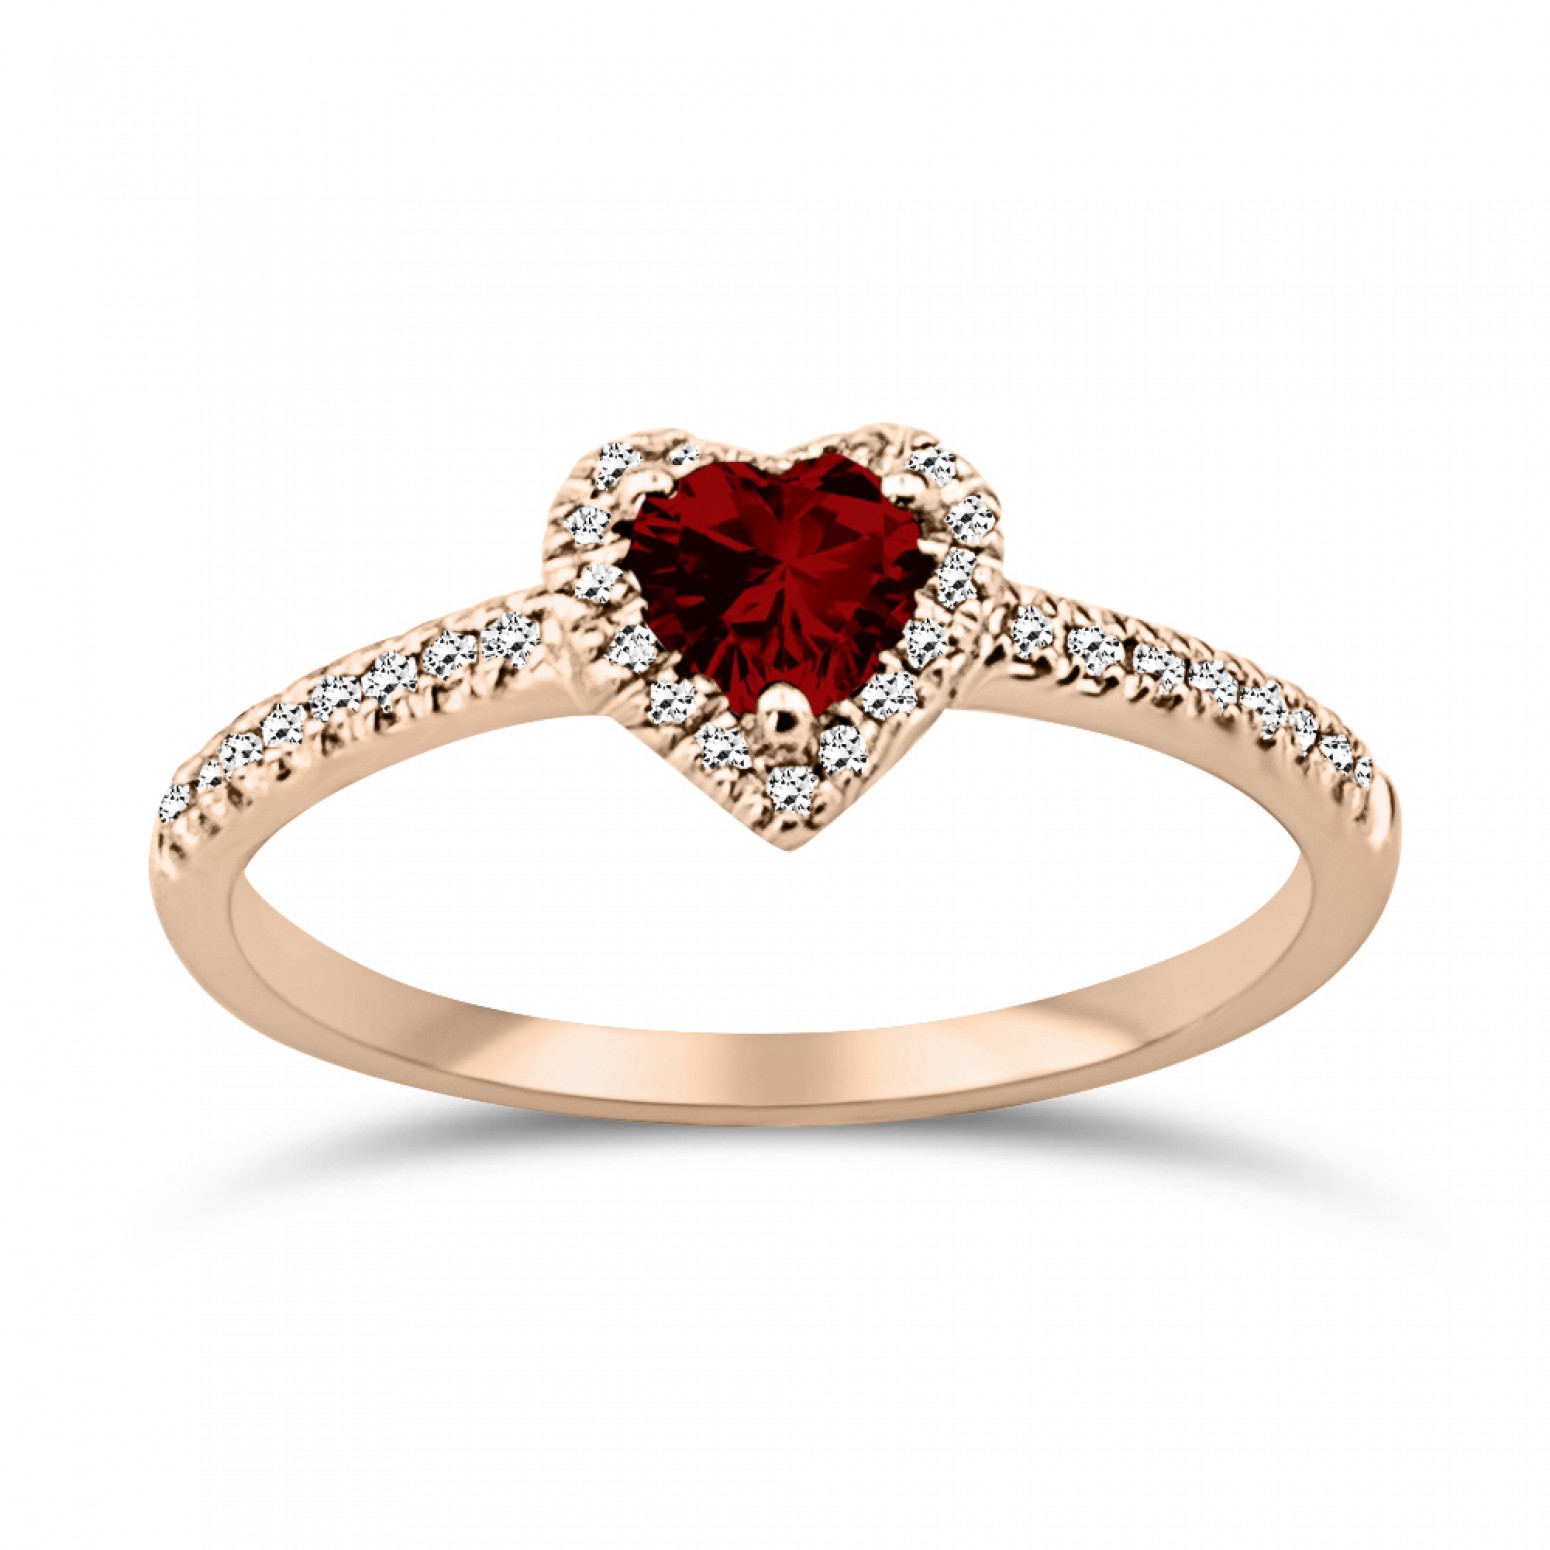 Solitaire heart ring 18K pink gold with ruby 0.46ct and diamonds VS1, H da4012 ENGAGEMENT RINGS Κοσμηματα - chrilia.gr